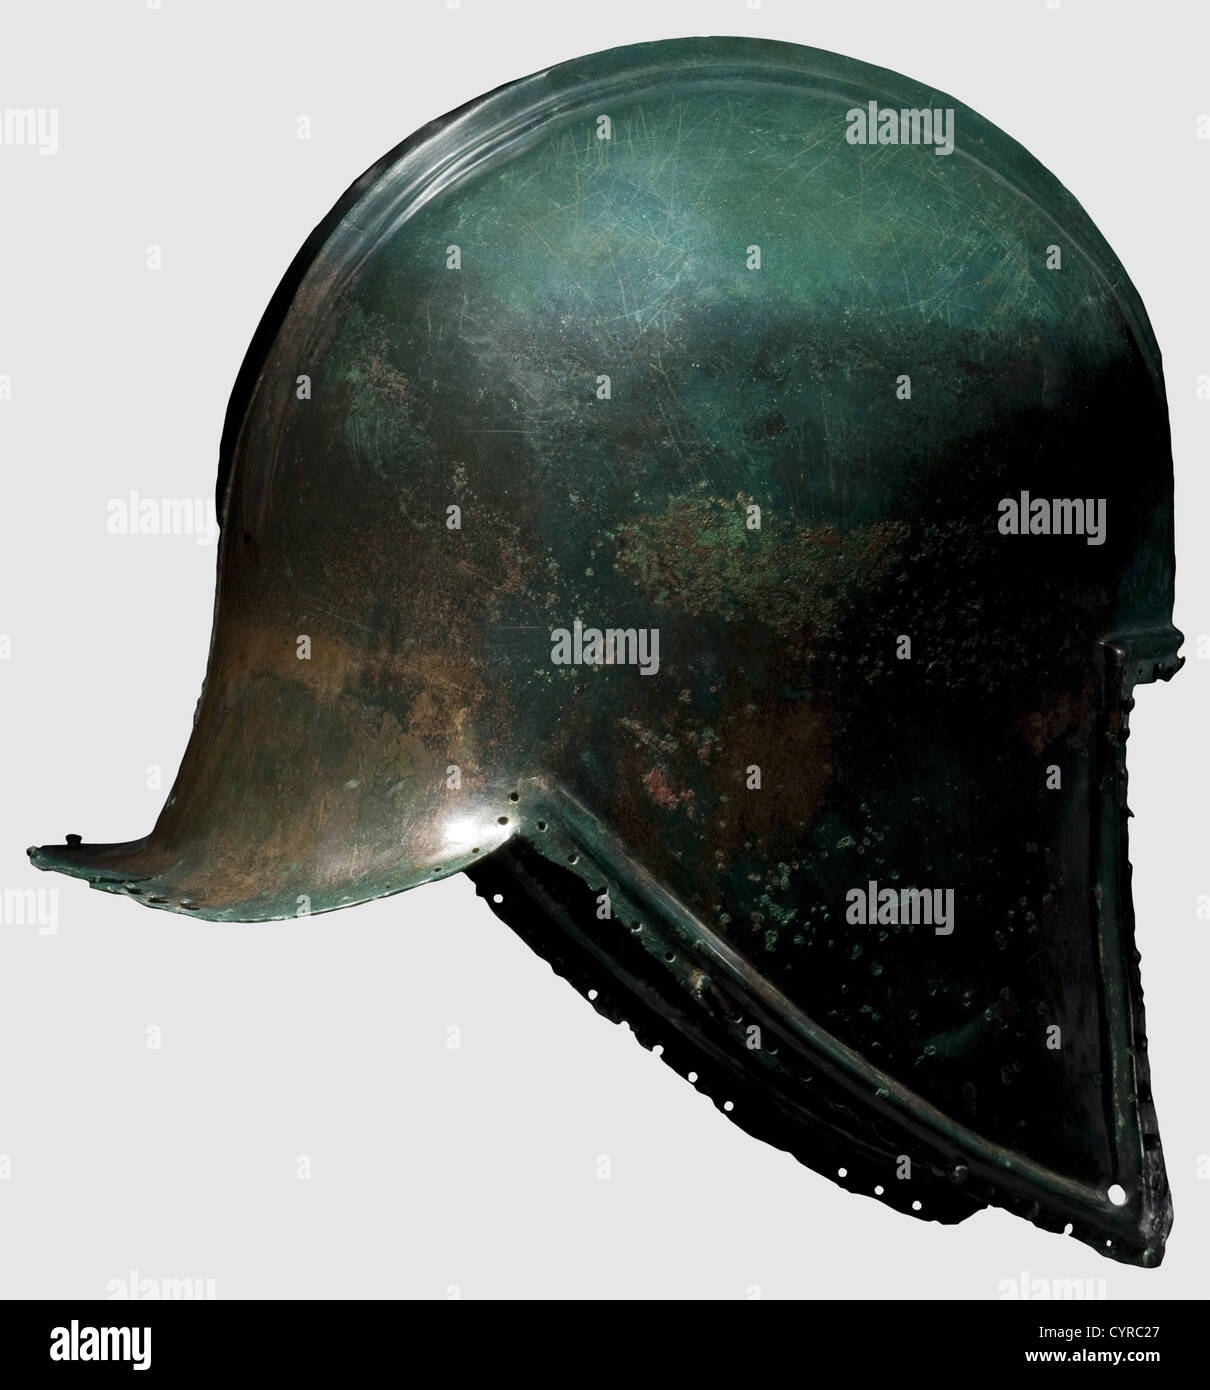 An Illyrian type helmet,6th century B.C.Bronze with fine green noble patina.Of domed form,the crown with two raised parallel ridges extending from front to back forming a crest base.A rectangular hole pierced at centre front for crest attachment.Rectangular face opening,the pointed cheekpieces with pierced holes for the chinstrap.Slightly flaring neck-guard.The edge bordered by a moulded rib and a row of pierced holes for lining attachment with partially preserved rivets.Small corrosion pits in some places,slightly torn at rear.Height 22 cm.Good me,Additional-Rights-Clearences-Not Available Stock Photo